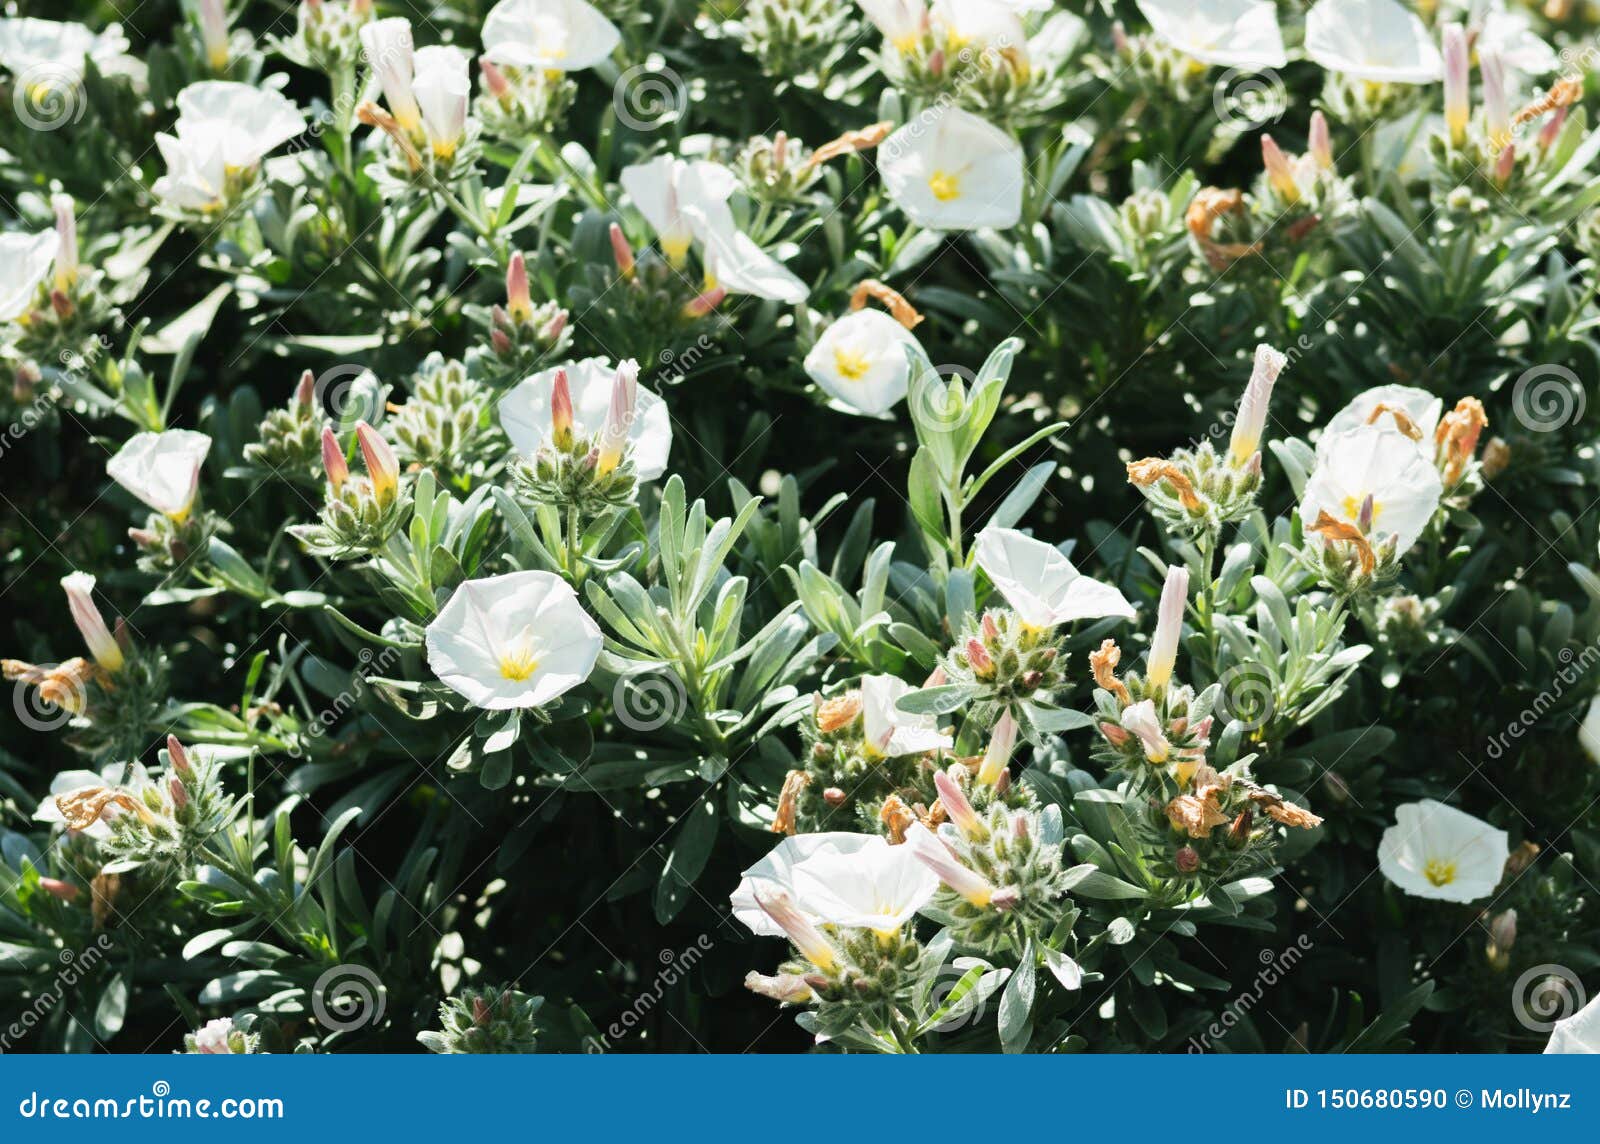 convolvulus cneorum, also known as silverbush or shrubby bindweed